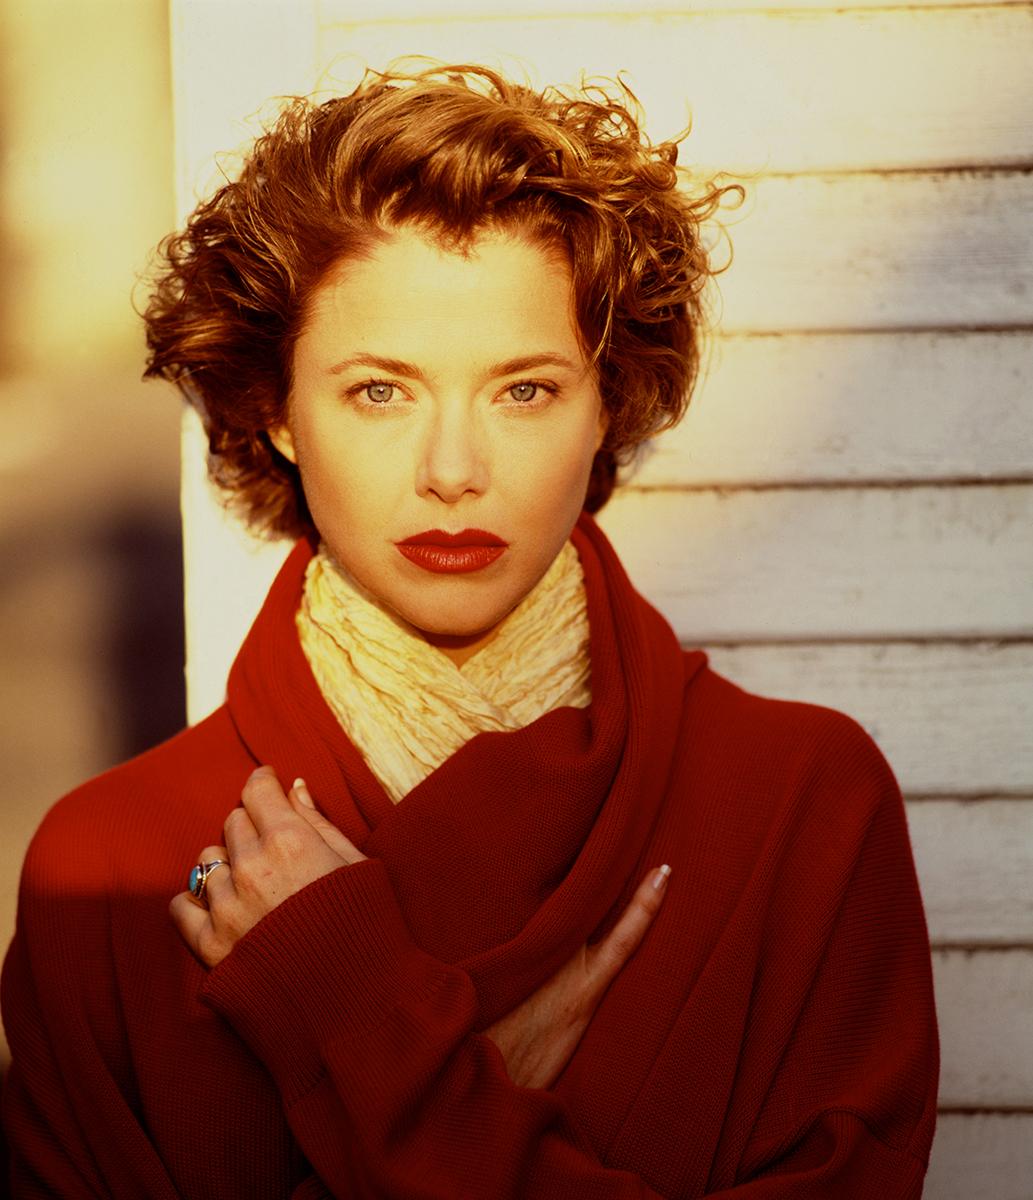 Happy Birthday to Annette Bening, who turns 57 today! 